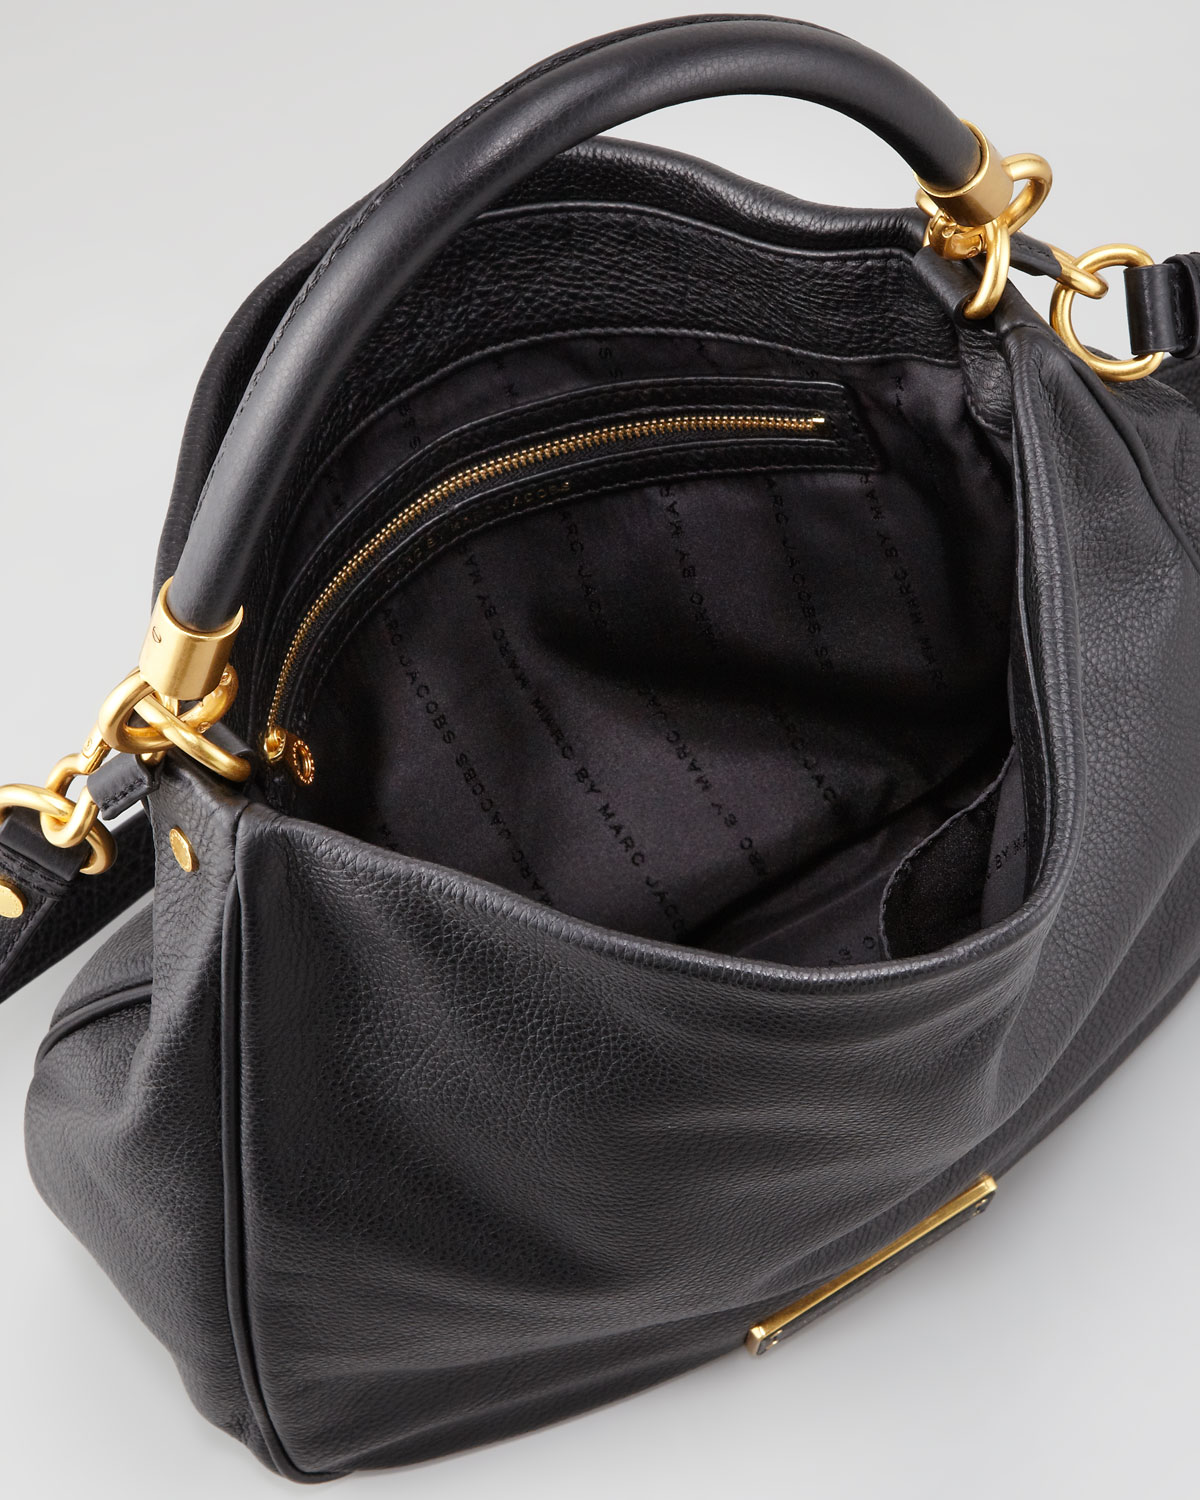 Marc By Marc Jacobs Too Hot To Handle Hobo Bag Black in Black - Lyst